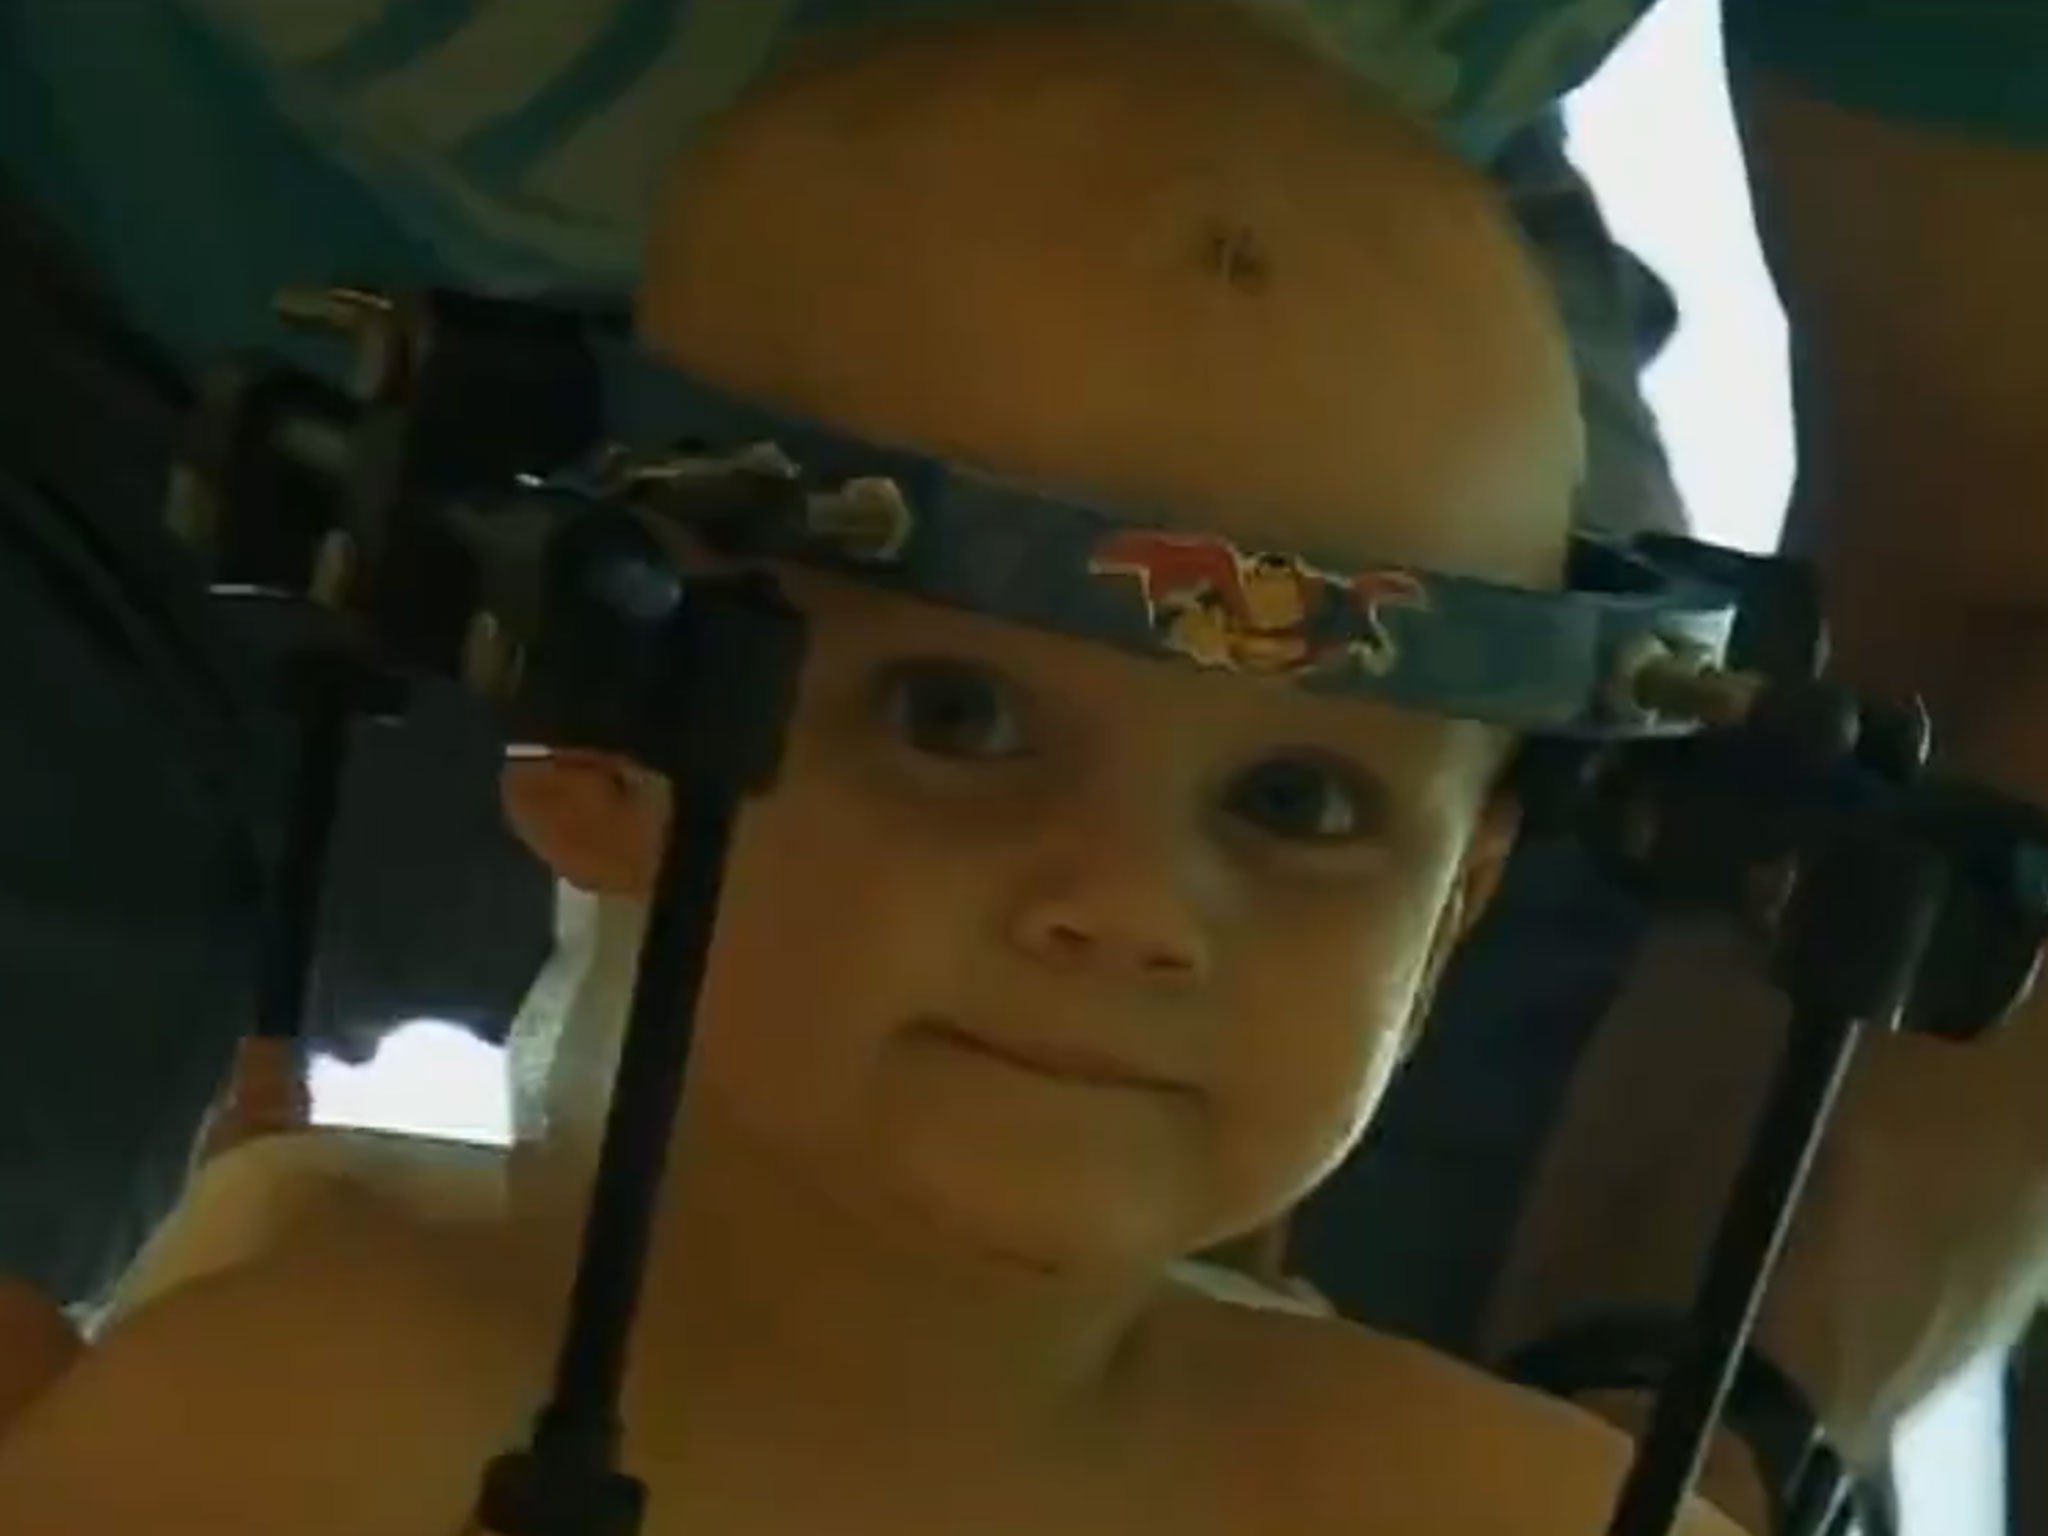 Jaxon Taylor now wears a "halo" to help his vertebrae fuse together.